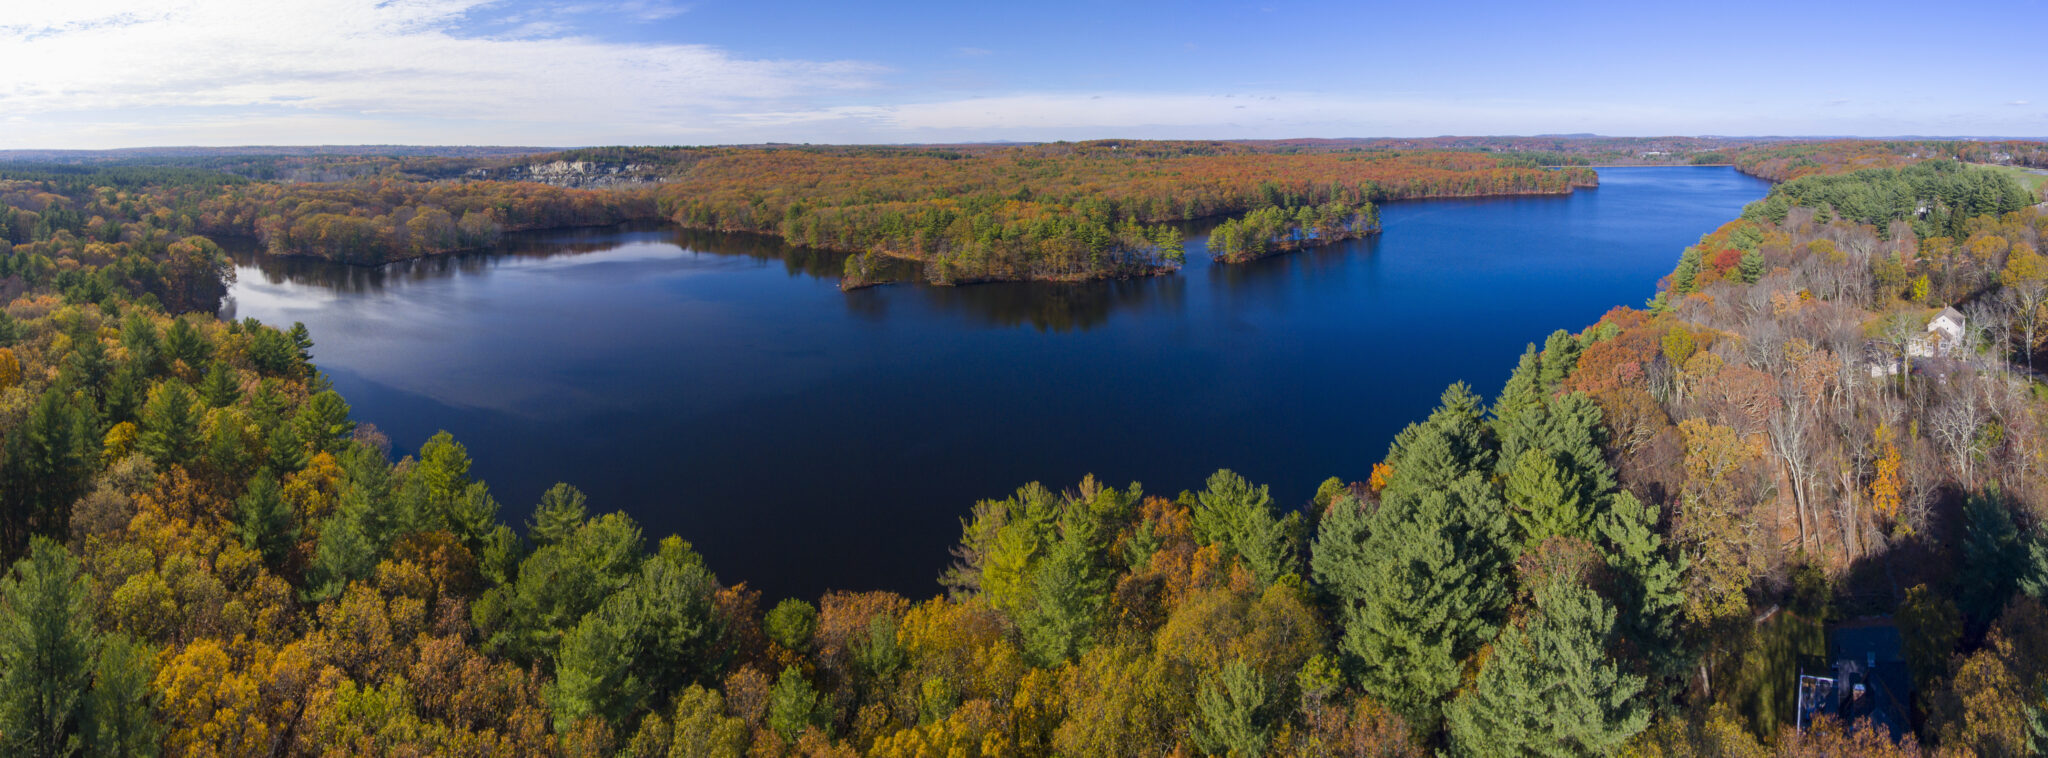 Ashland Reservoir aerial view panorama with fall foliage in Ashland State Park in town of Ashland, Massachusetts MA, USA.